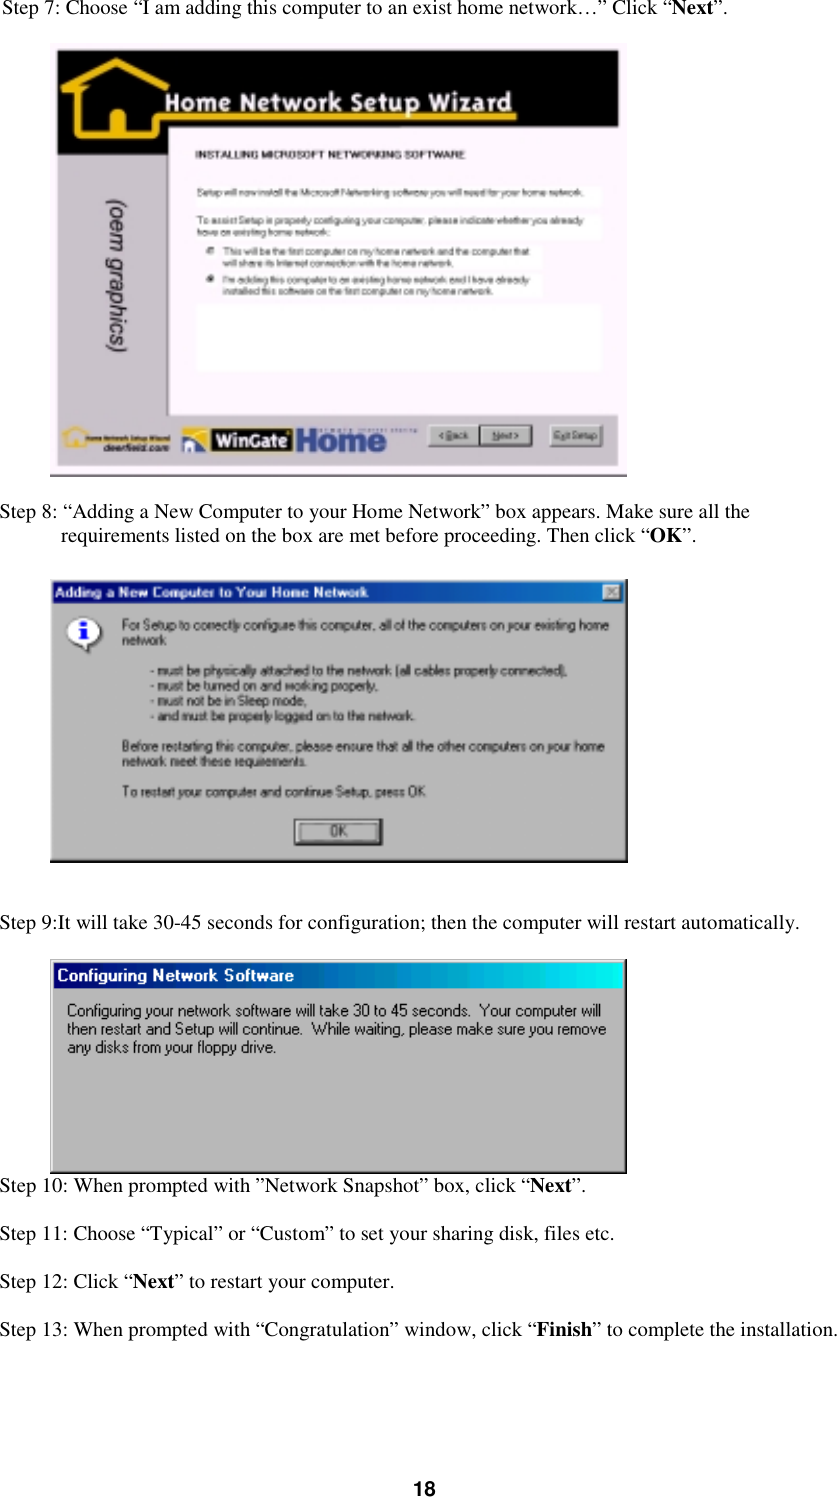 18Step 7: Choose “I am adding this computer to an exist home network…” Click “Next”.Step 8: “Adding a New Computer to your Home Network” box appears. Make sure all therequirements listed on the box are met before proceeding. Then click “OK”.Step 9:It will take 30-45 seconds for configuration; then the computer will restart automatically.Step 10: When prompted with ”Network Snapshot” box, click “Next”.Step 11: Choose “Typical” or “Custom” to set your sharing disk, files etc.Step 12: Click “Next” to restart your computer.Step 13: When prompted with “Congratulation” window, click “Finish” to complete the installation.